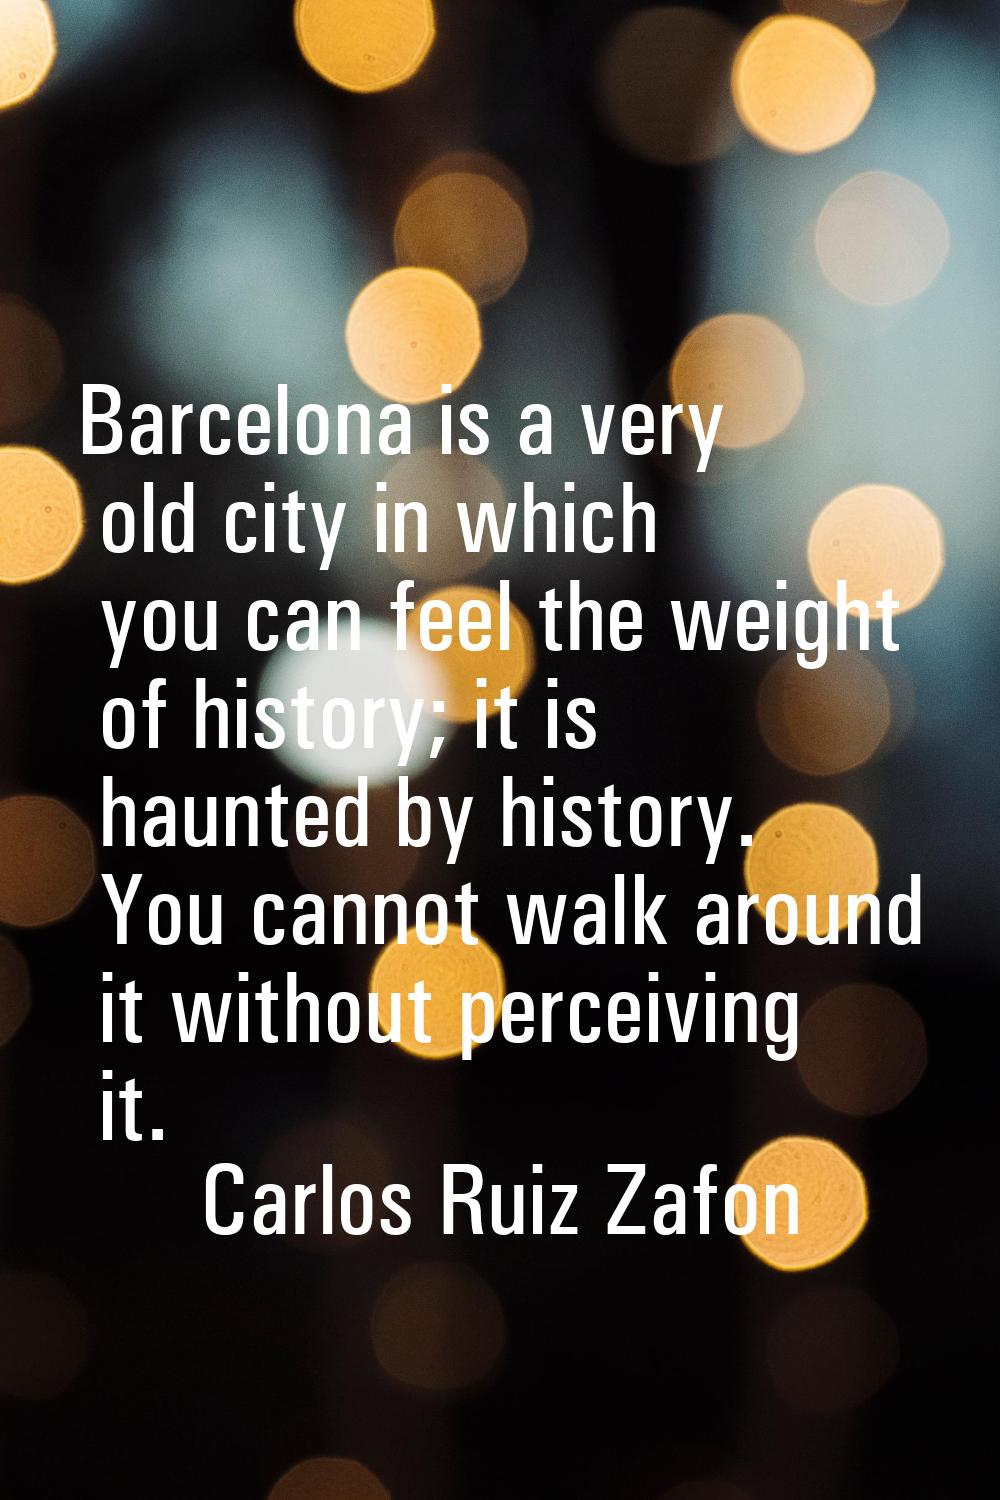 Barcelona is a very old city in which you can feel the weight of history; it is haunted by history.